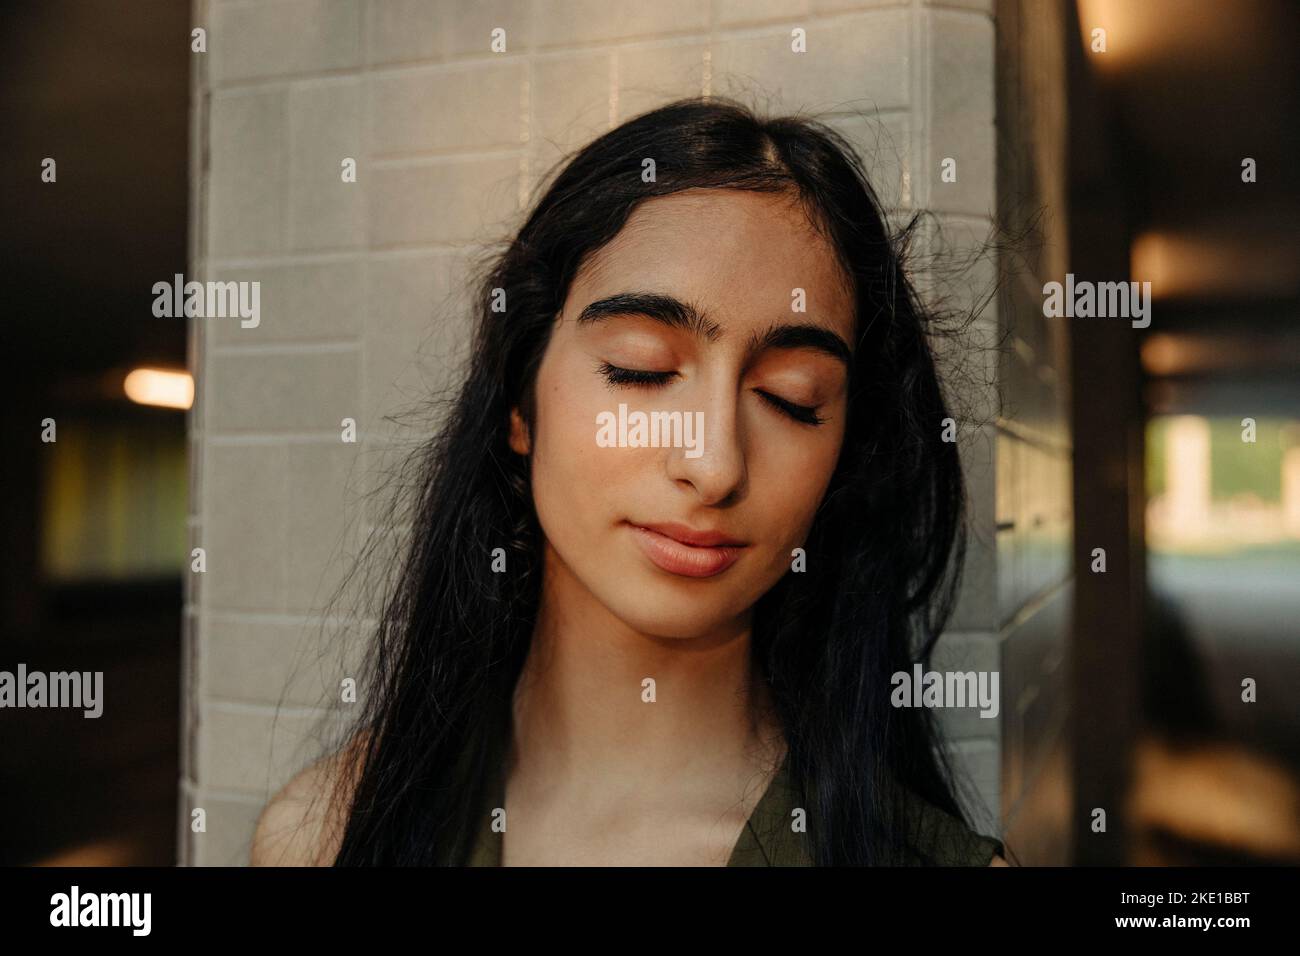 Teenage girl with eyes closed against column Stock Photo